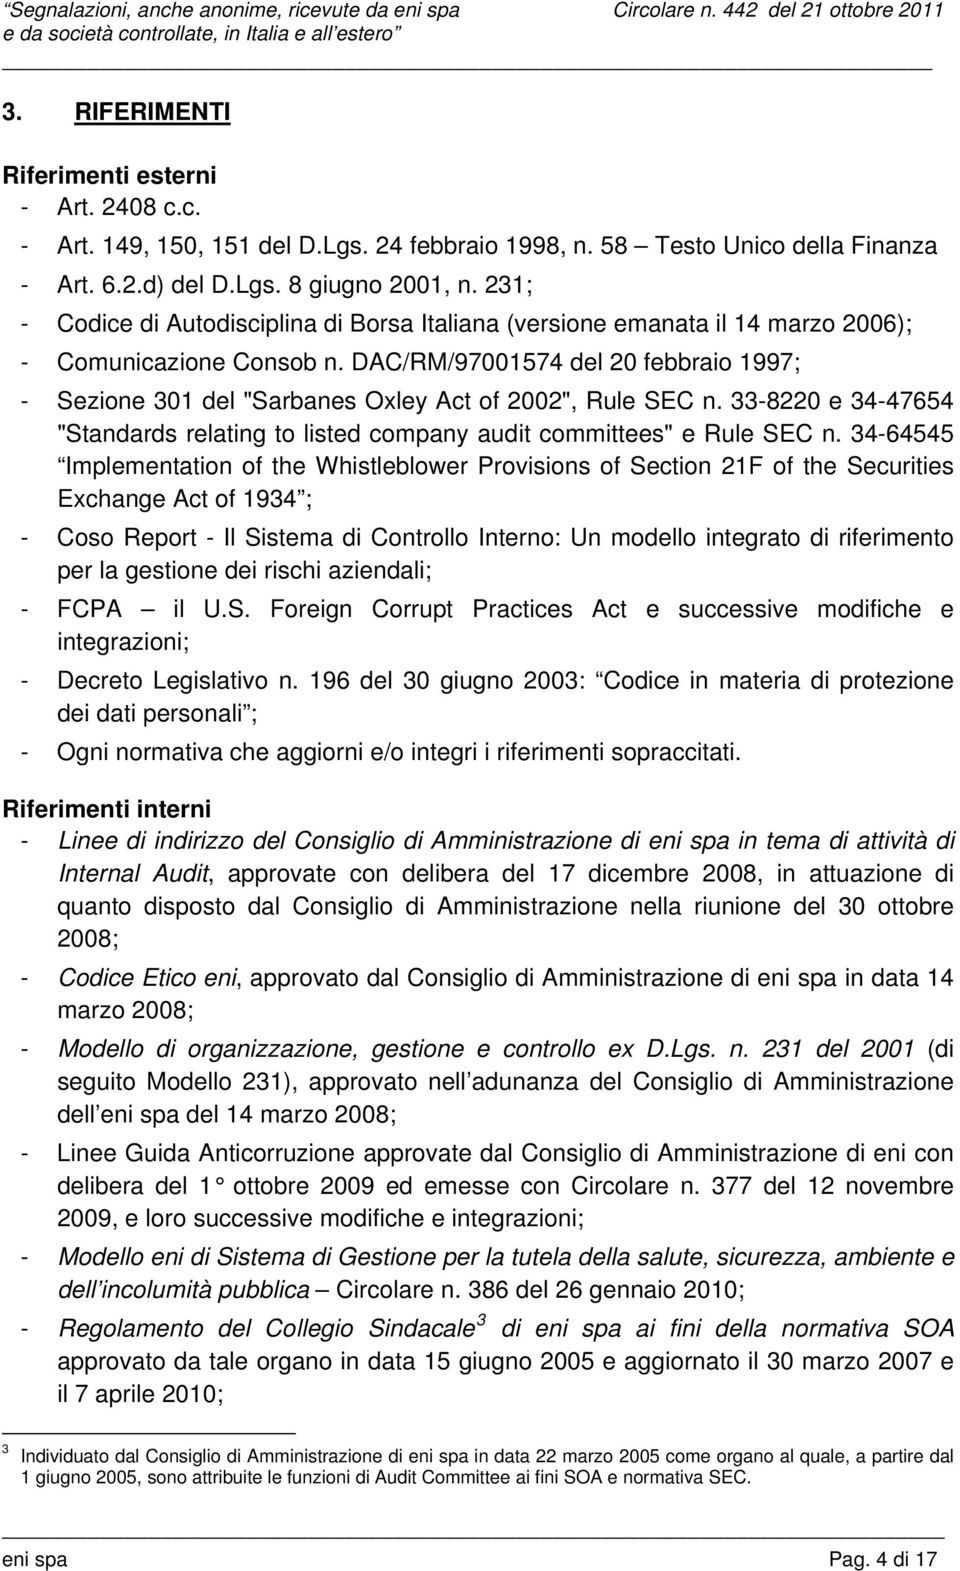 DAC/RM/97001574 del 20 febbraio 1997; - Sezione 301 del "Sarbanes Oxley Act of 2002", Rule SEC n. 33-8220 e 34-47654 "Standards relating to listed company audit committees" e Rule SEC n.